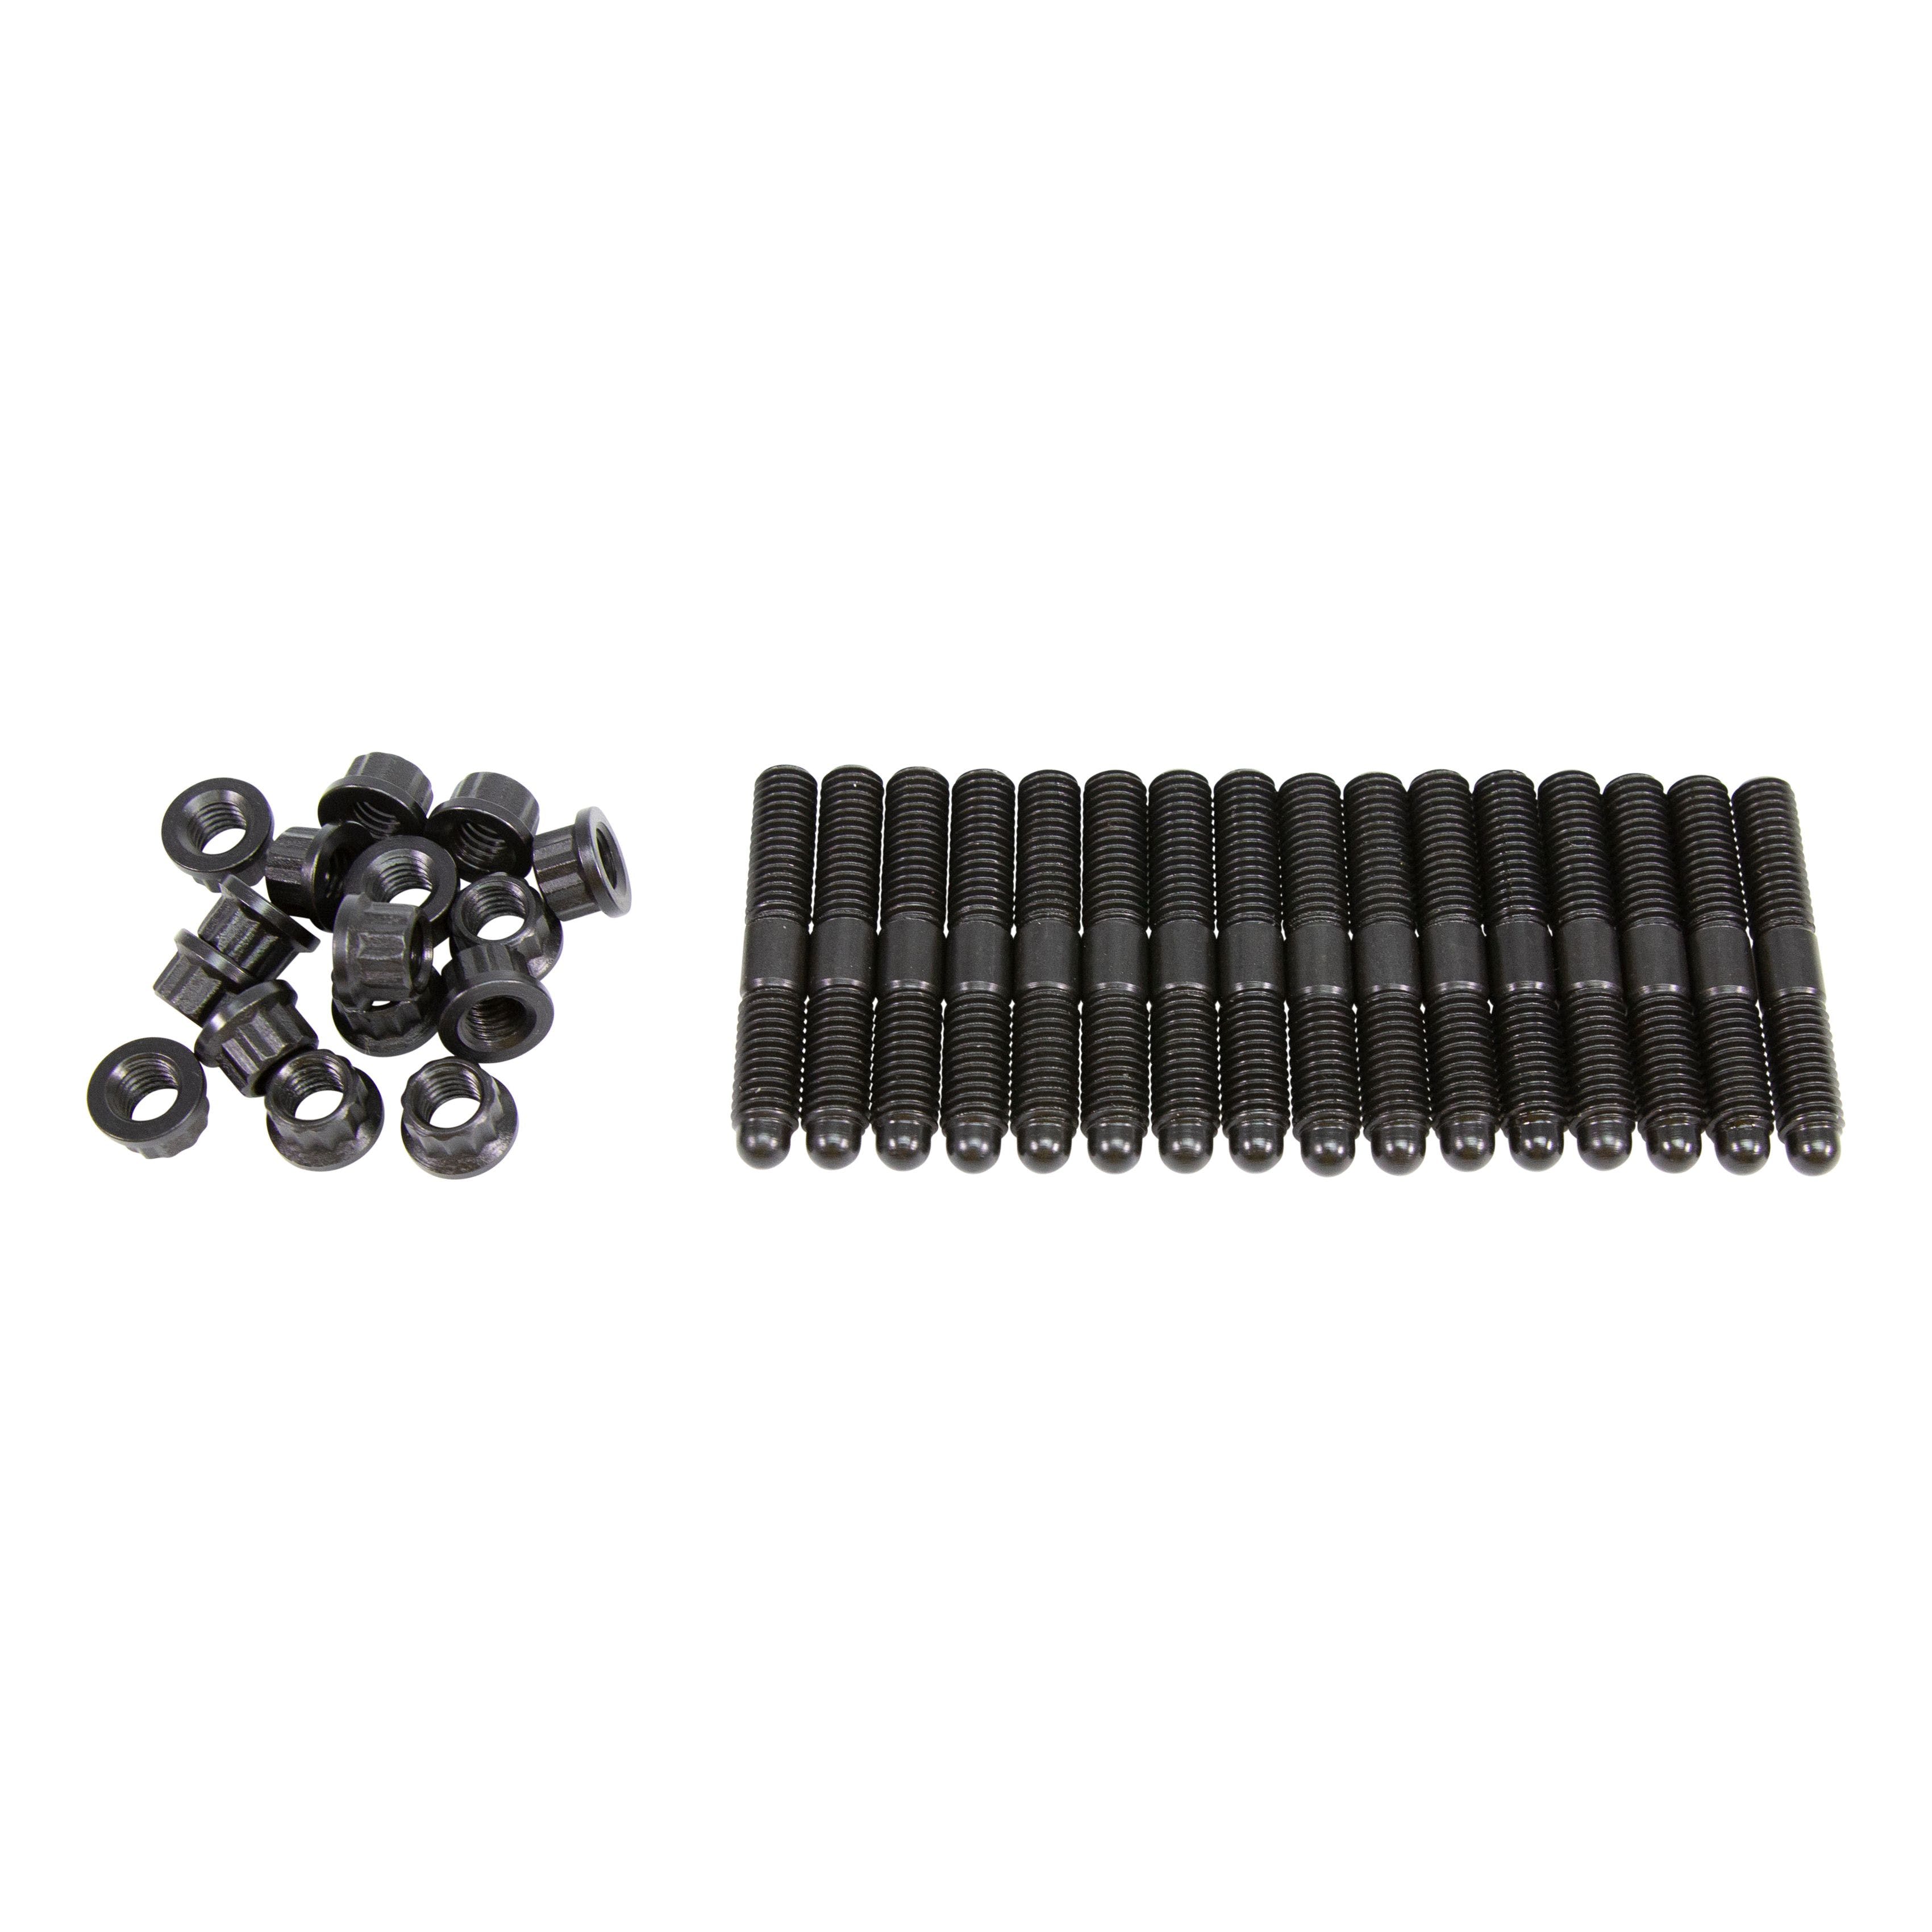 Competition Cams 4587-KIT M8x1.25 threads on both sides. 52mm Overall Stud Length. 12 Point flange nuts